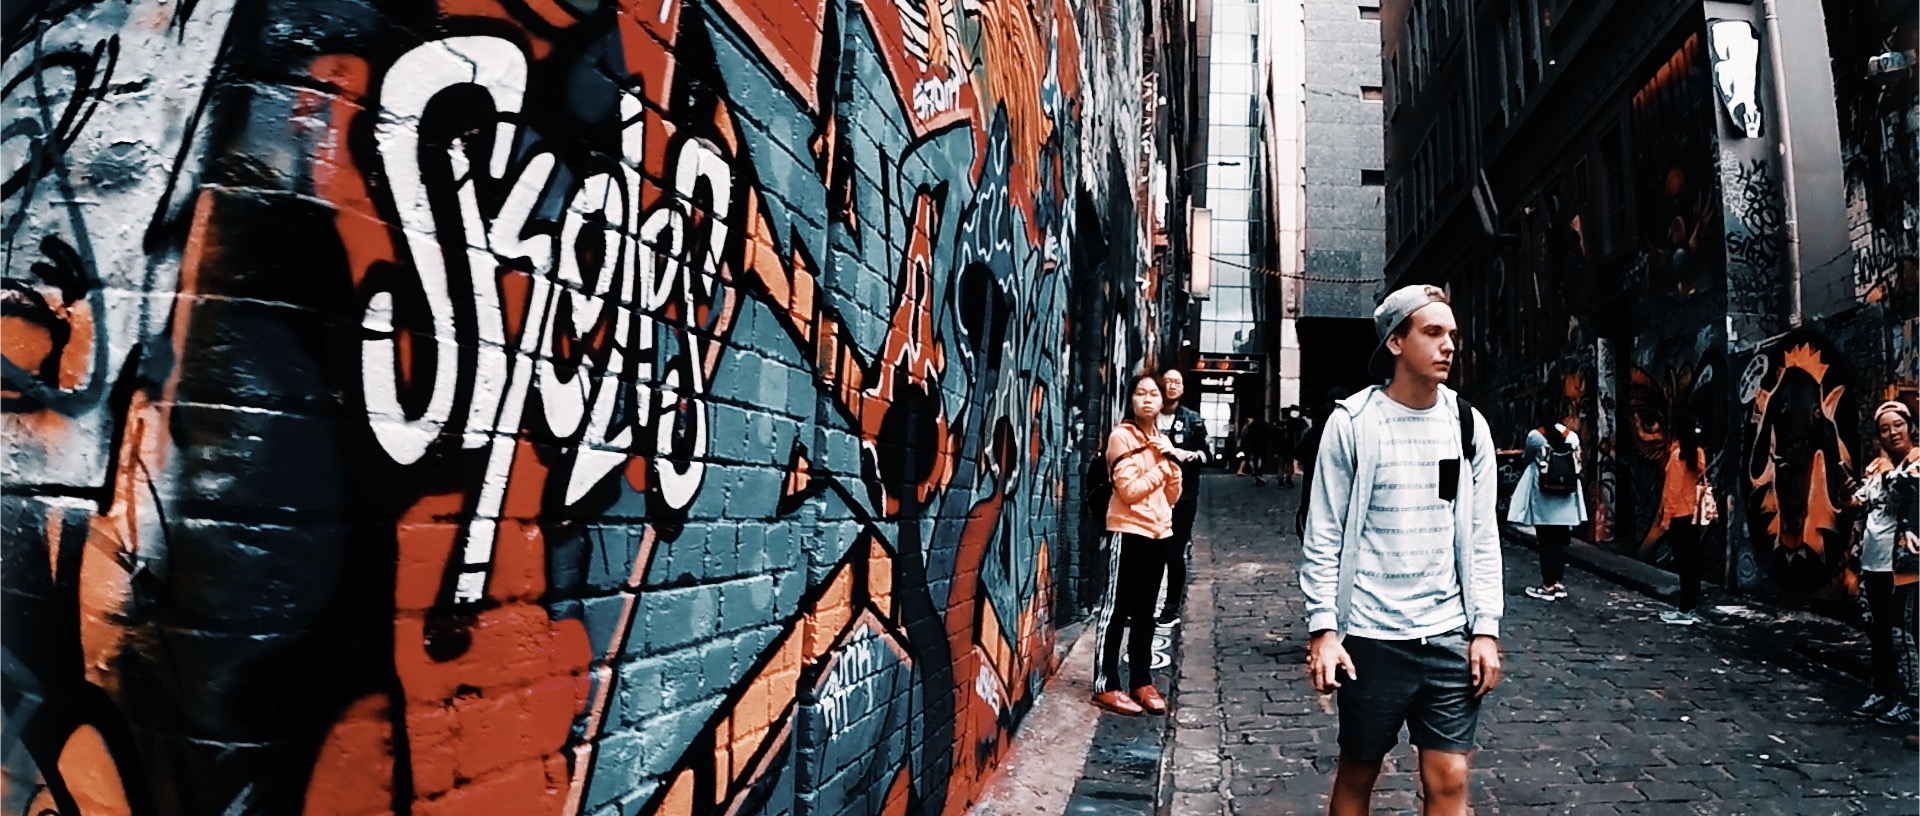 Melbourne graffiti hosier lane, GoPro for to those who dream episode one